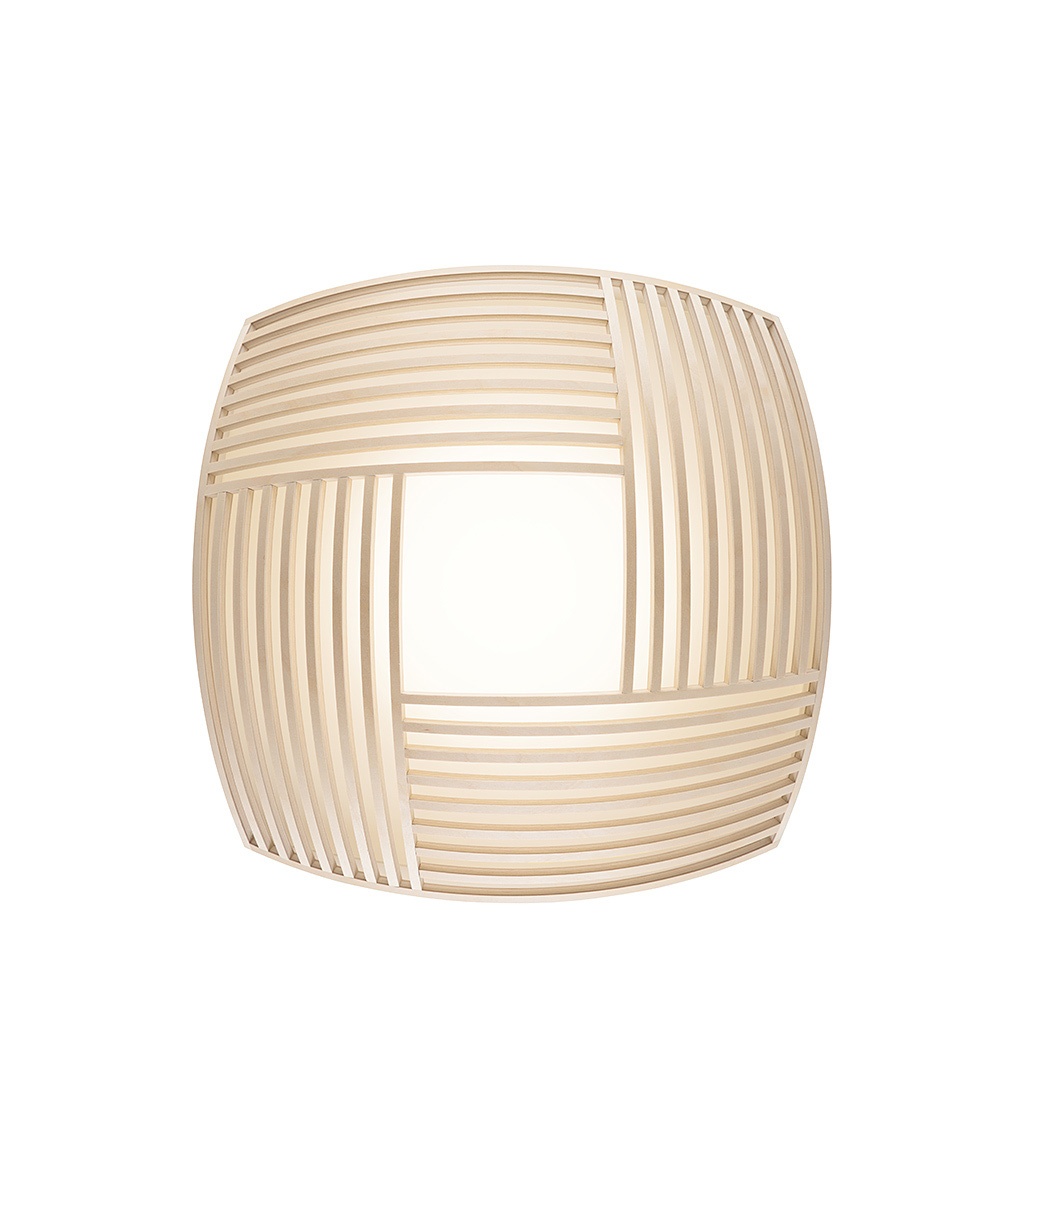 Kuulto 9100 ceiling lamp is available in natural birch